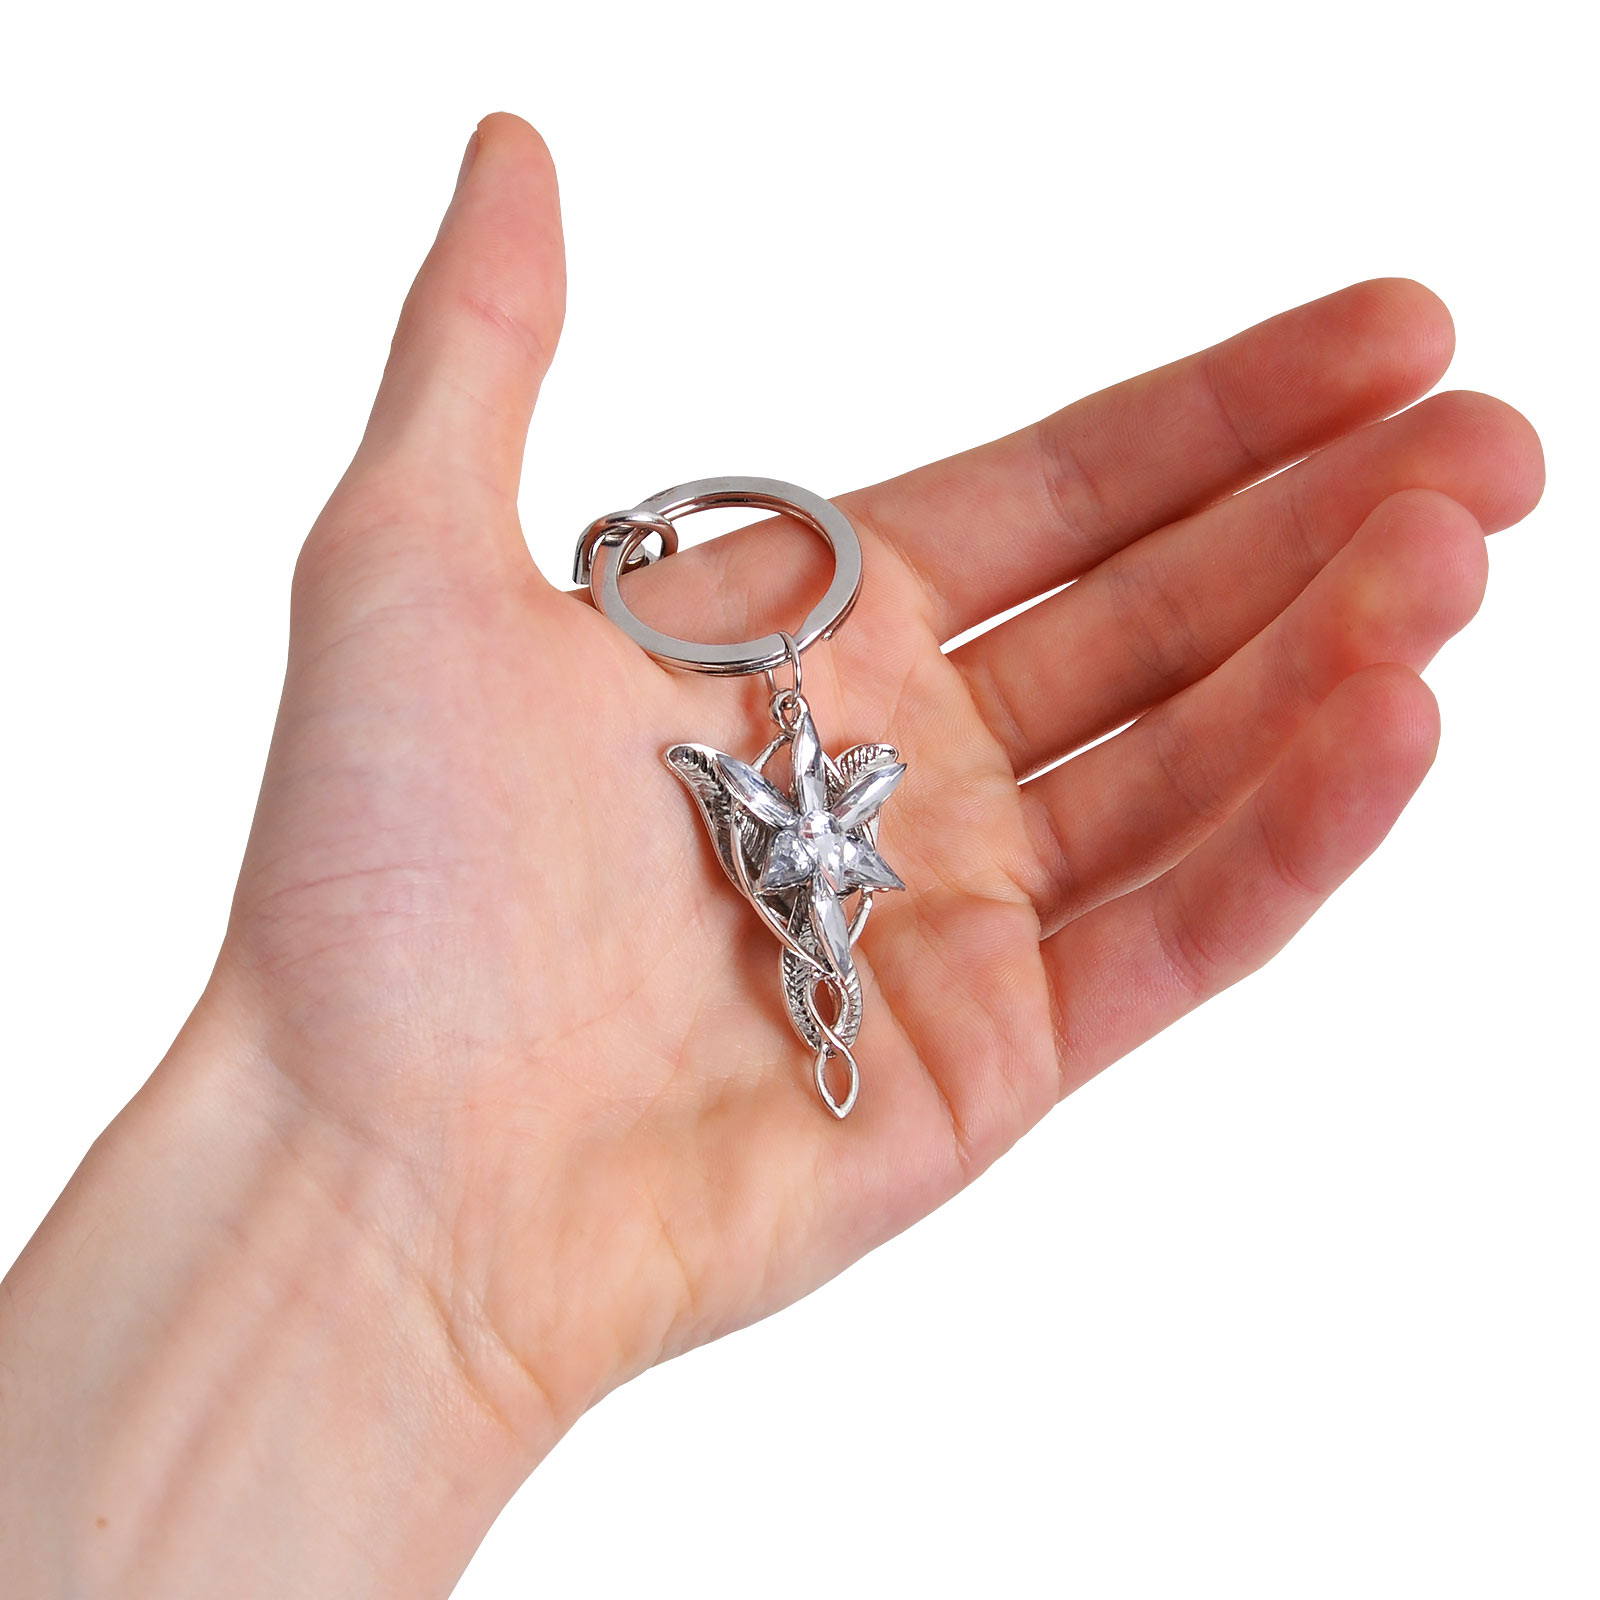 Lord of the Rings - Arwen's Evenstar Keychain